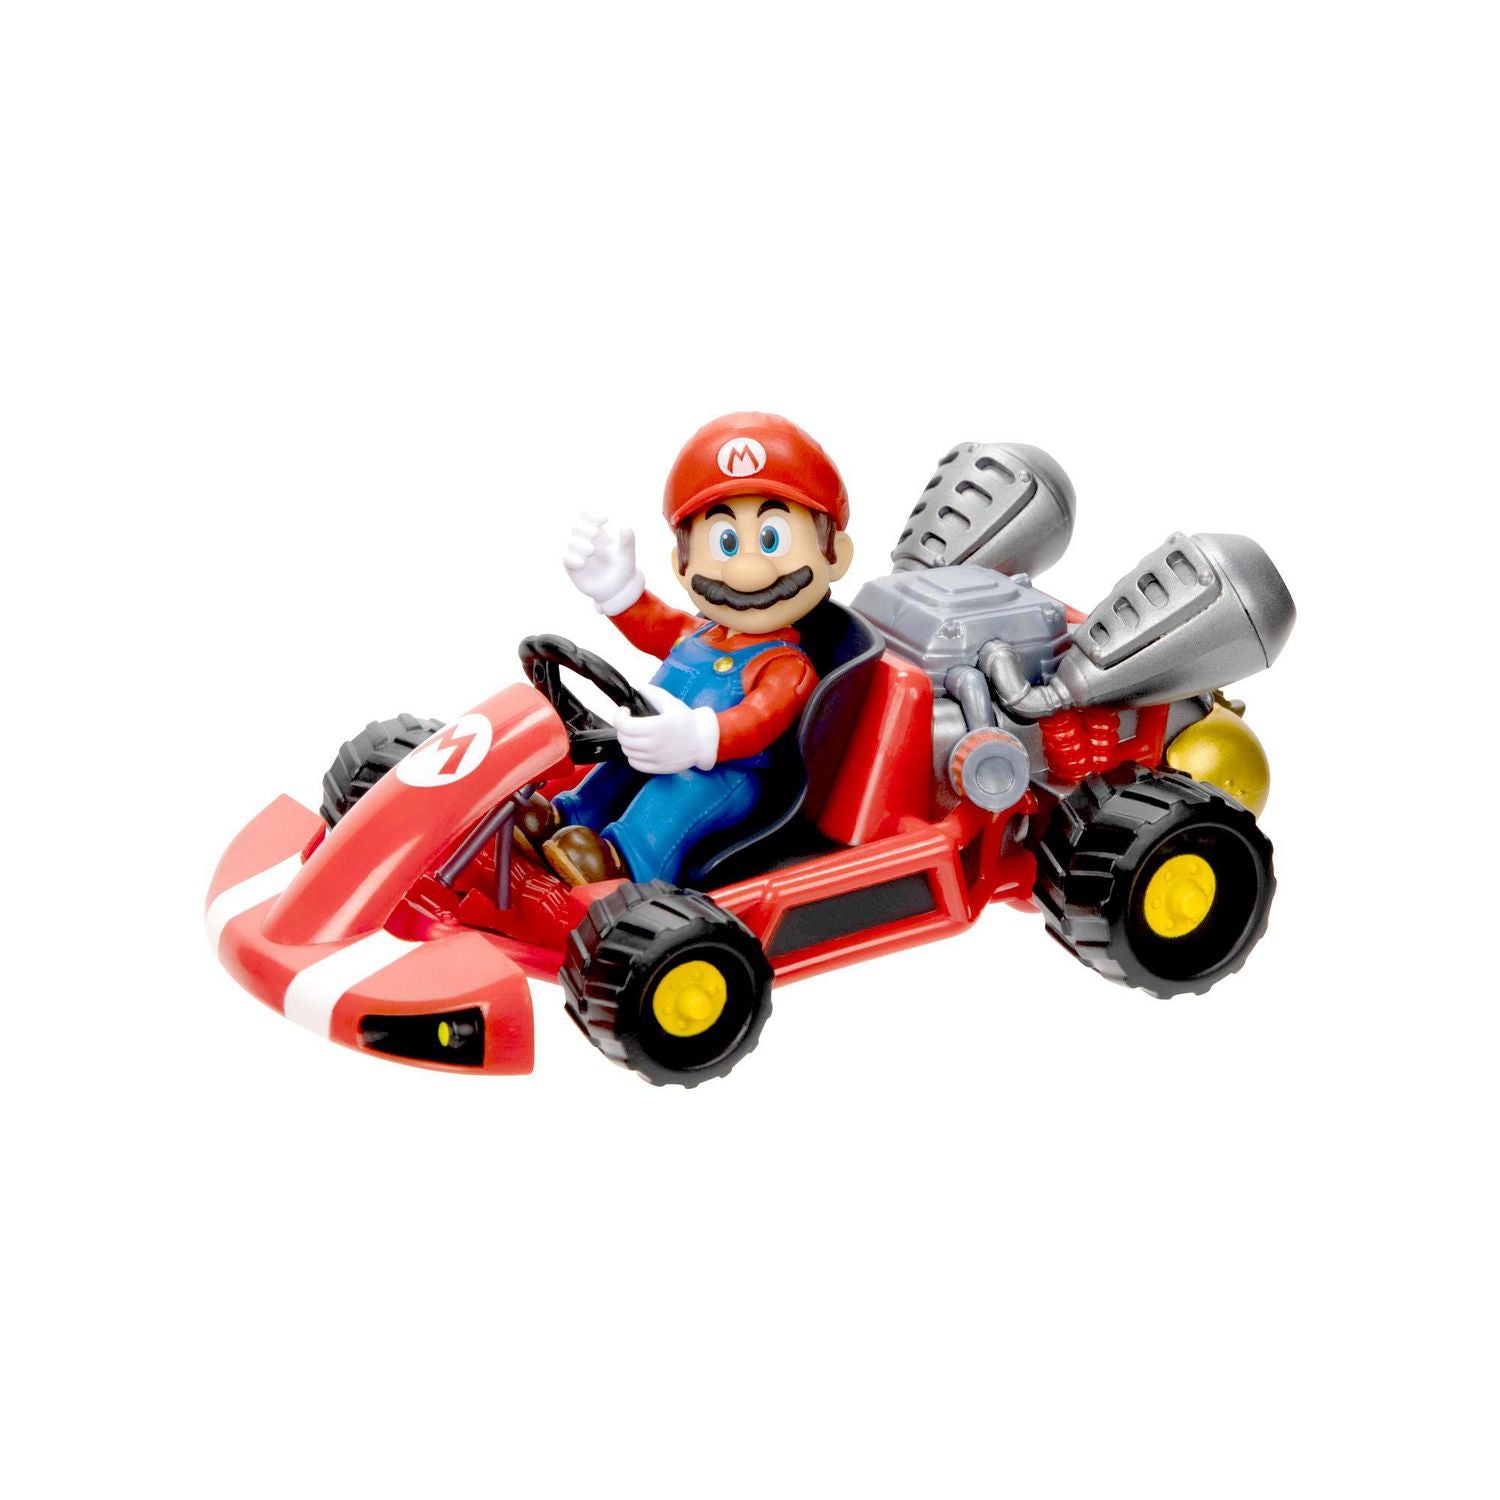 Open Box - The Super Mario Bros. Movie 2.5” Figure with Pull Back Racer Mario